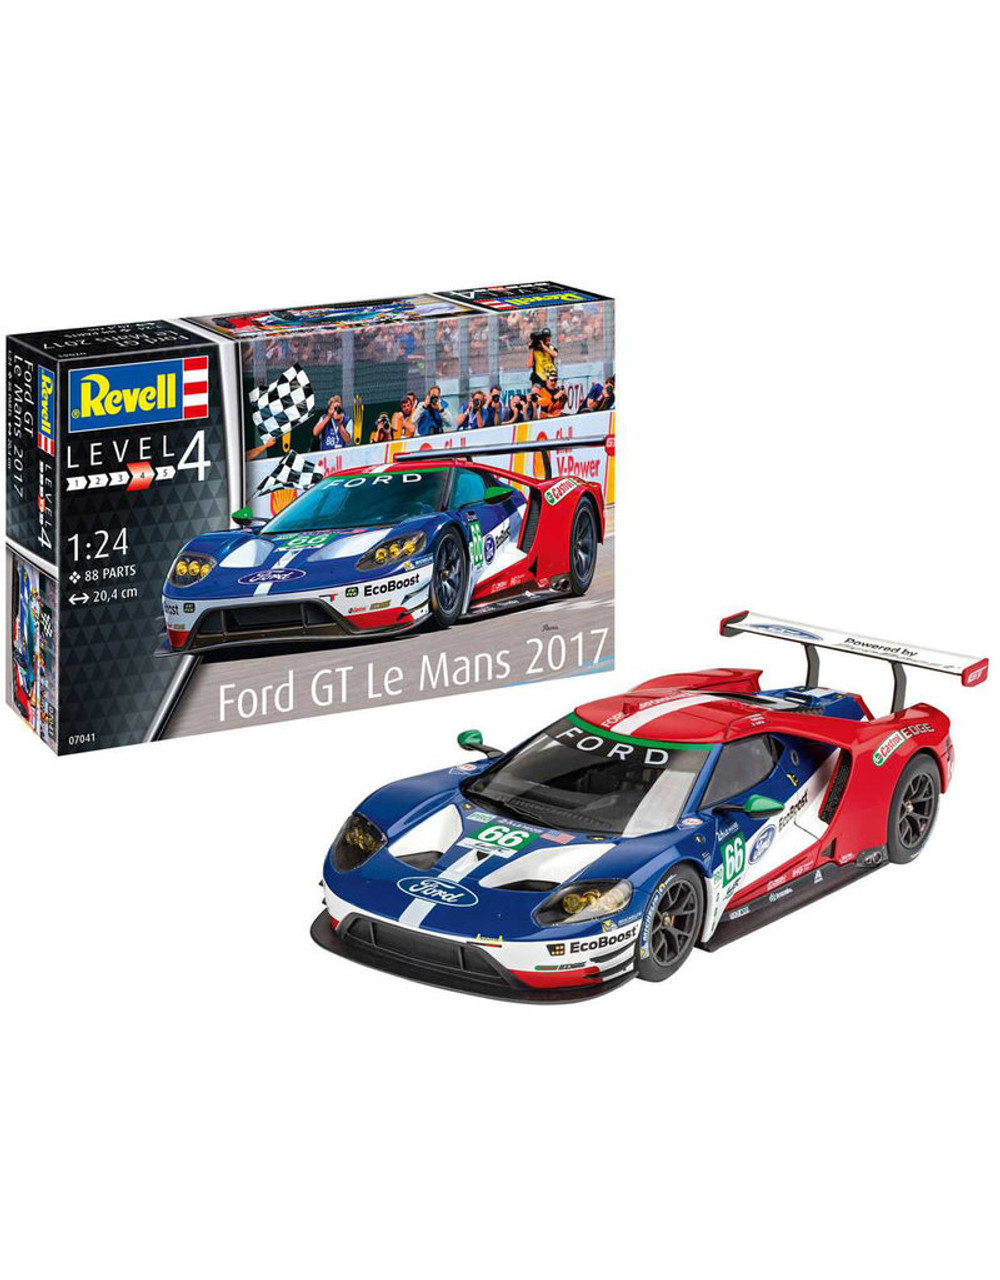 1/24 Ford GT Le Mans 2017 - 85441800012